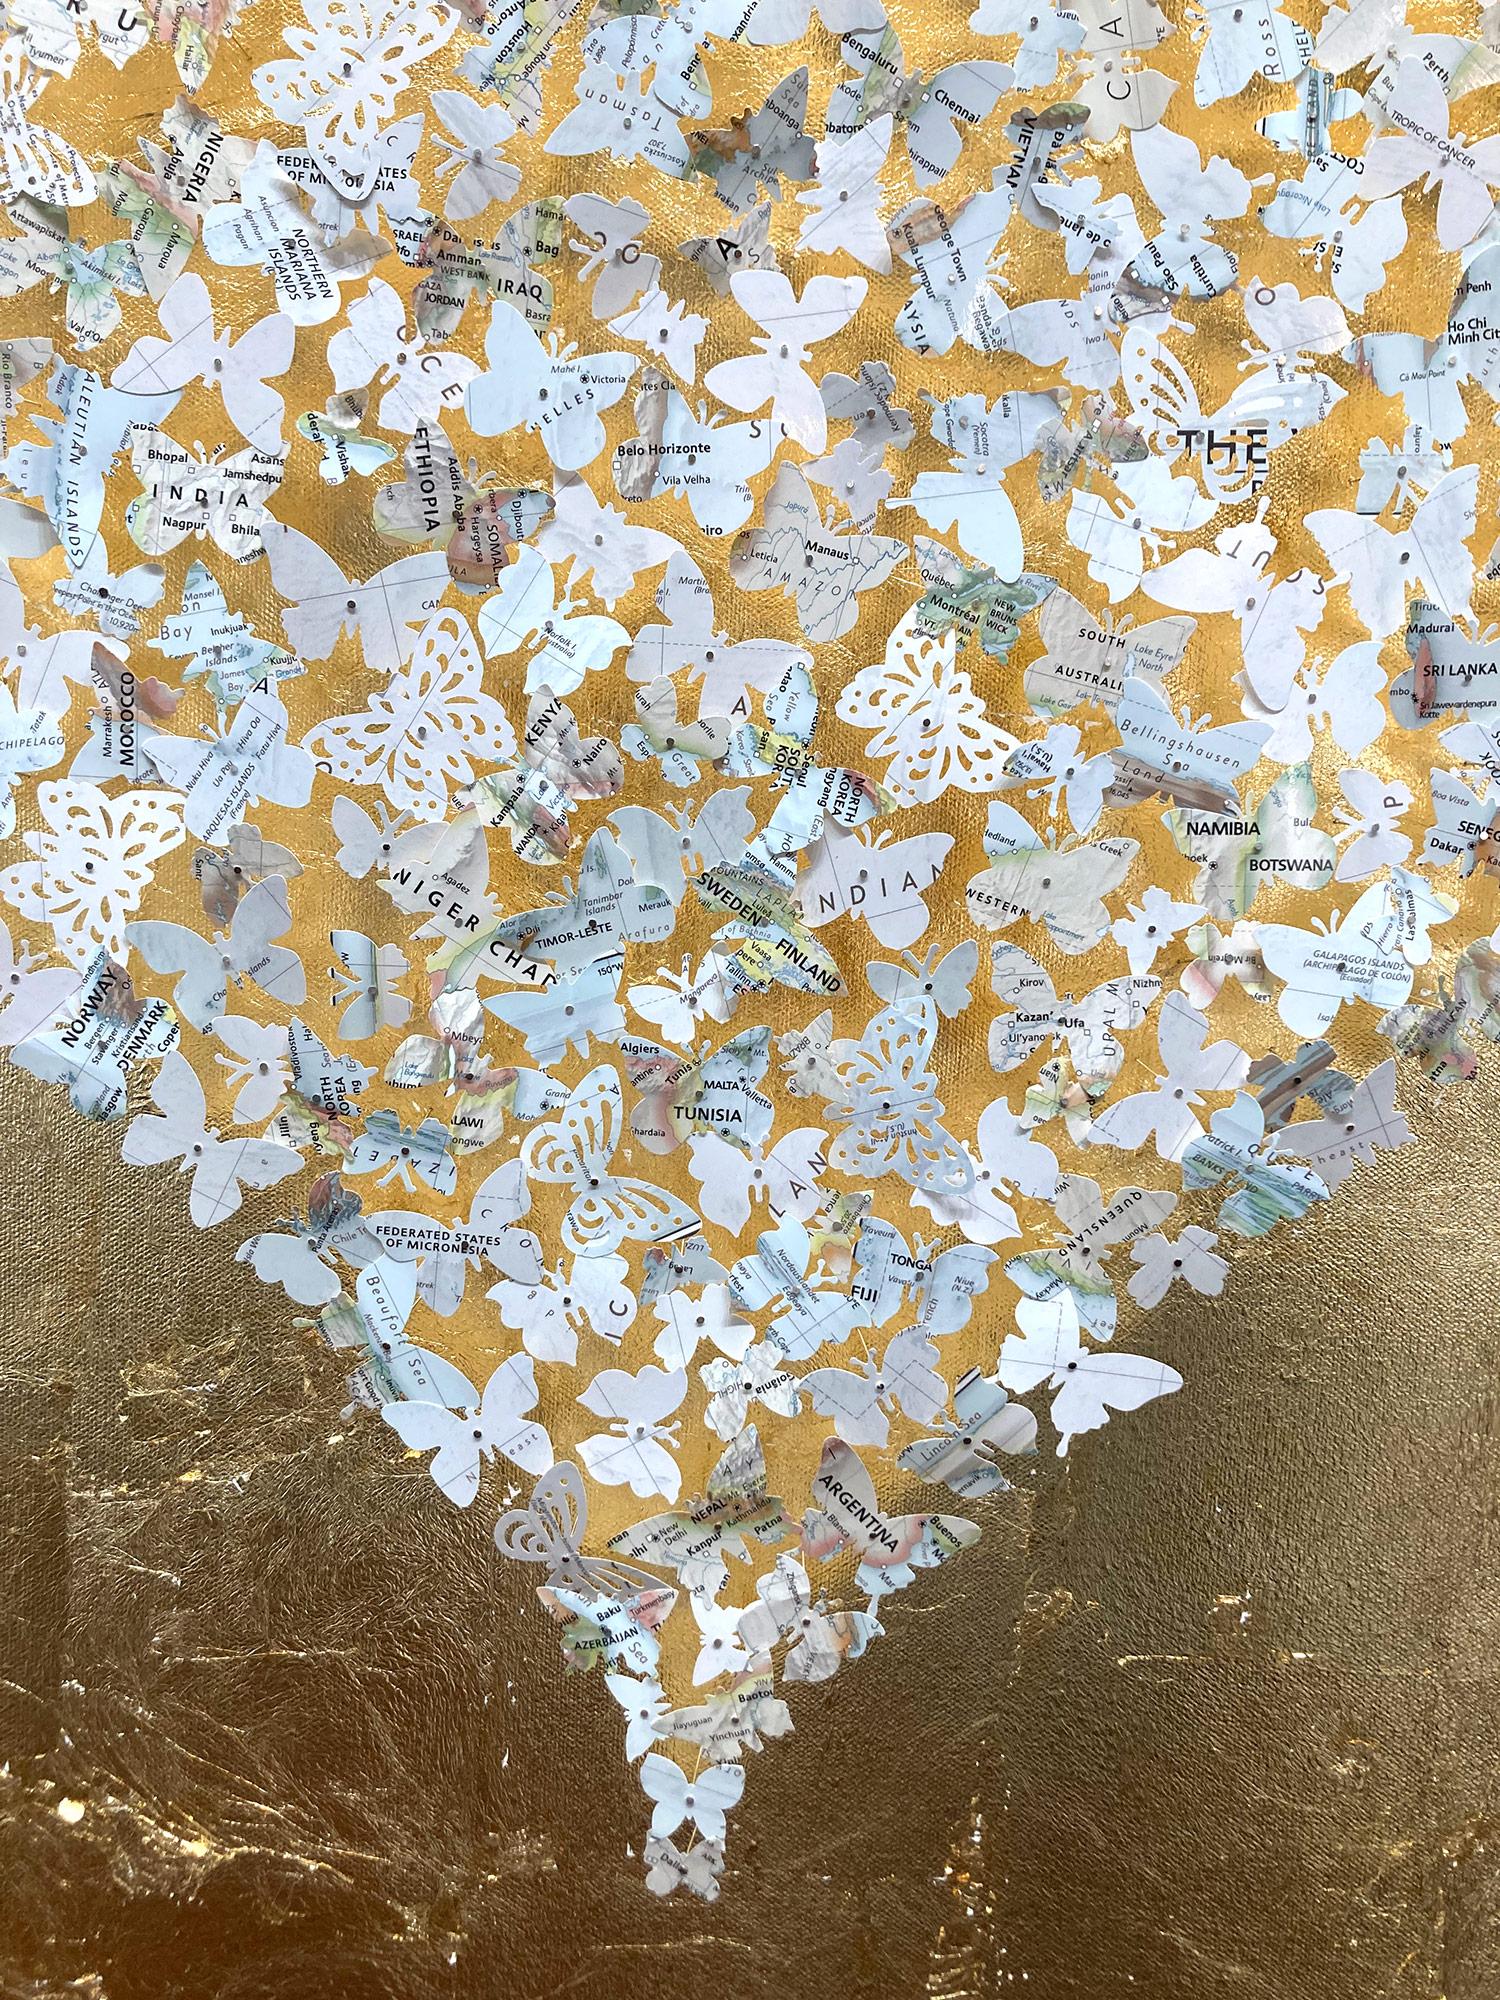 This piece is executed with hundreds of hand cut butterflies over a glowing gold leaf back ground. Comes displayed in an acrylic shadow box. These works conjure sensations of nostalgia, created from maps, cutting out words, symbols, and places to